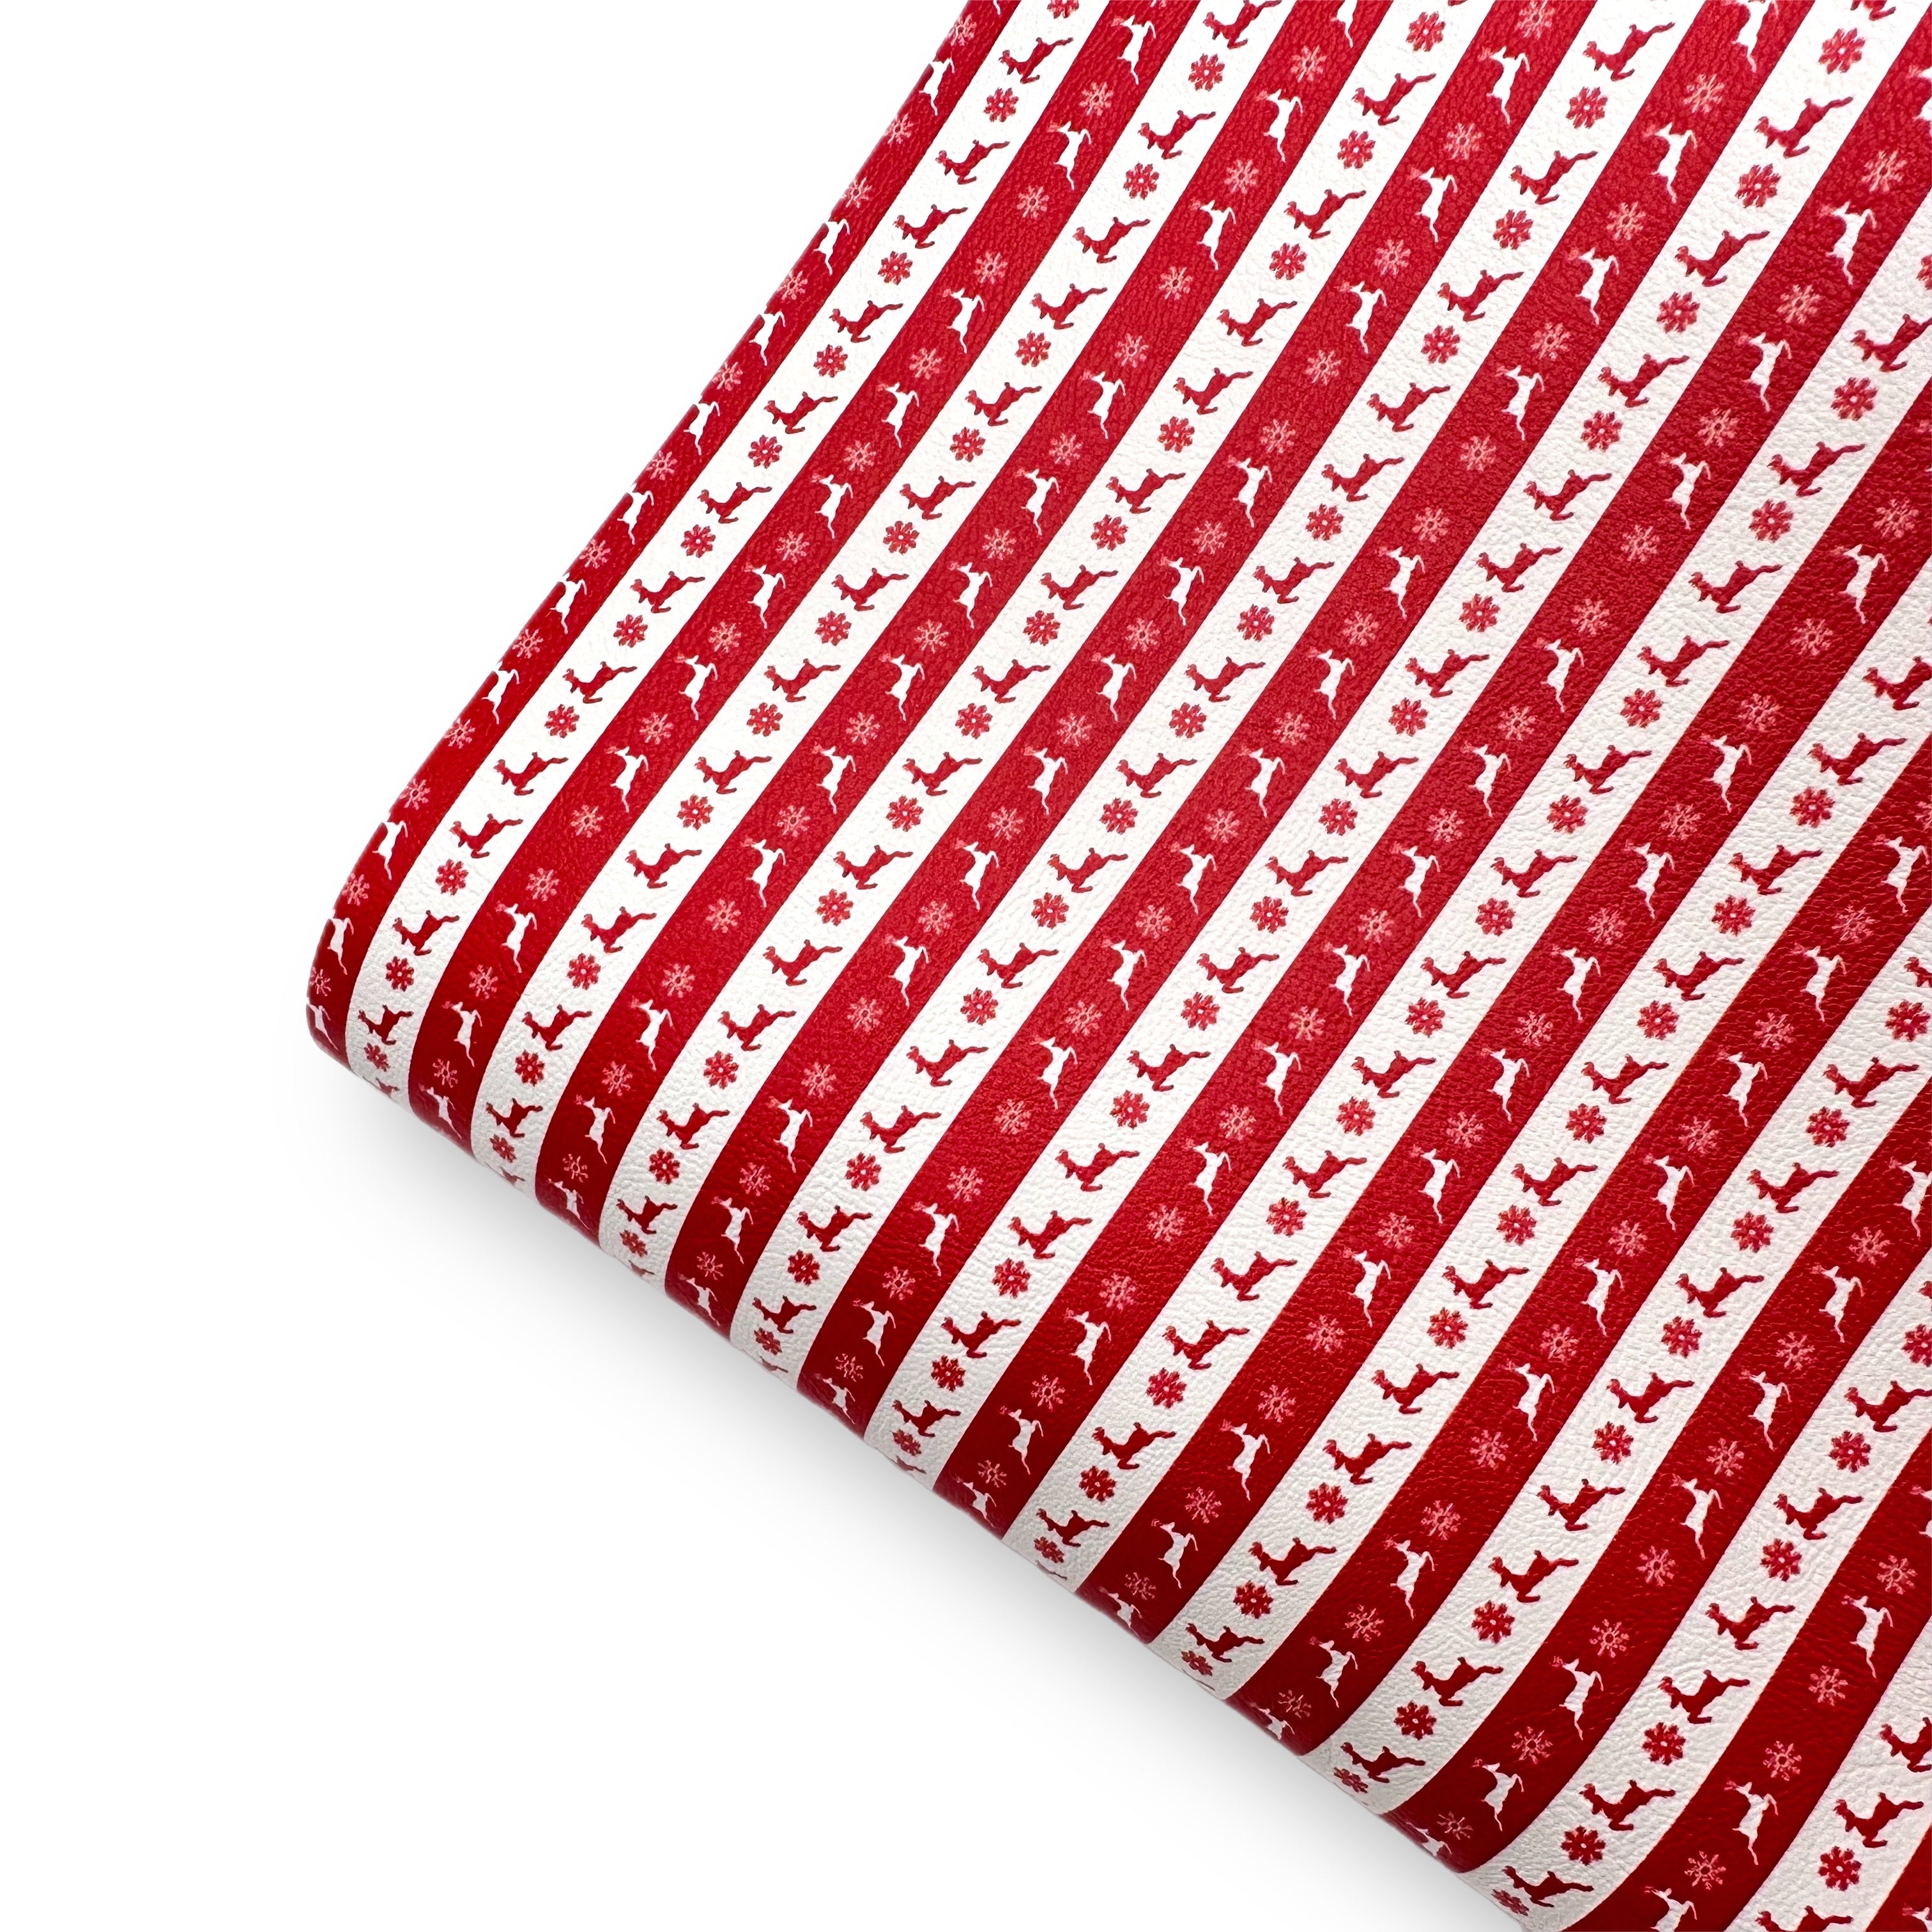 Scandi Xmas Reindeers Premium Faux Leather Fabric Sheets